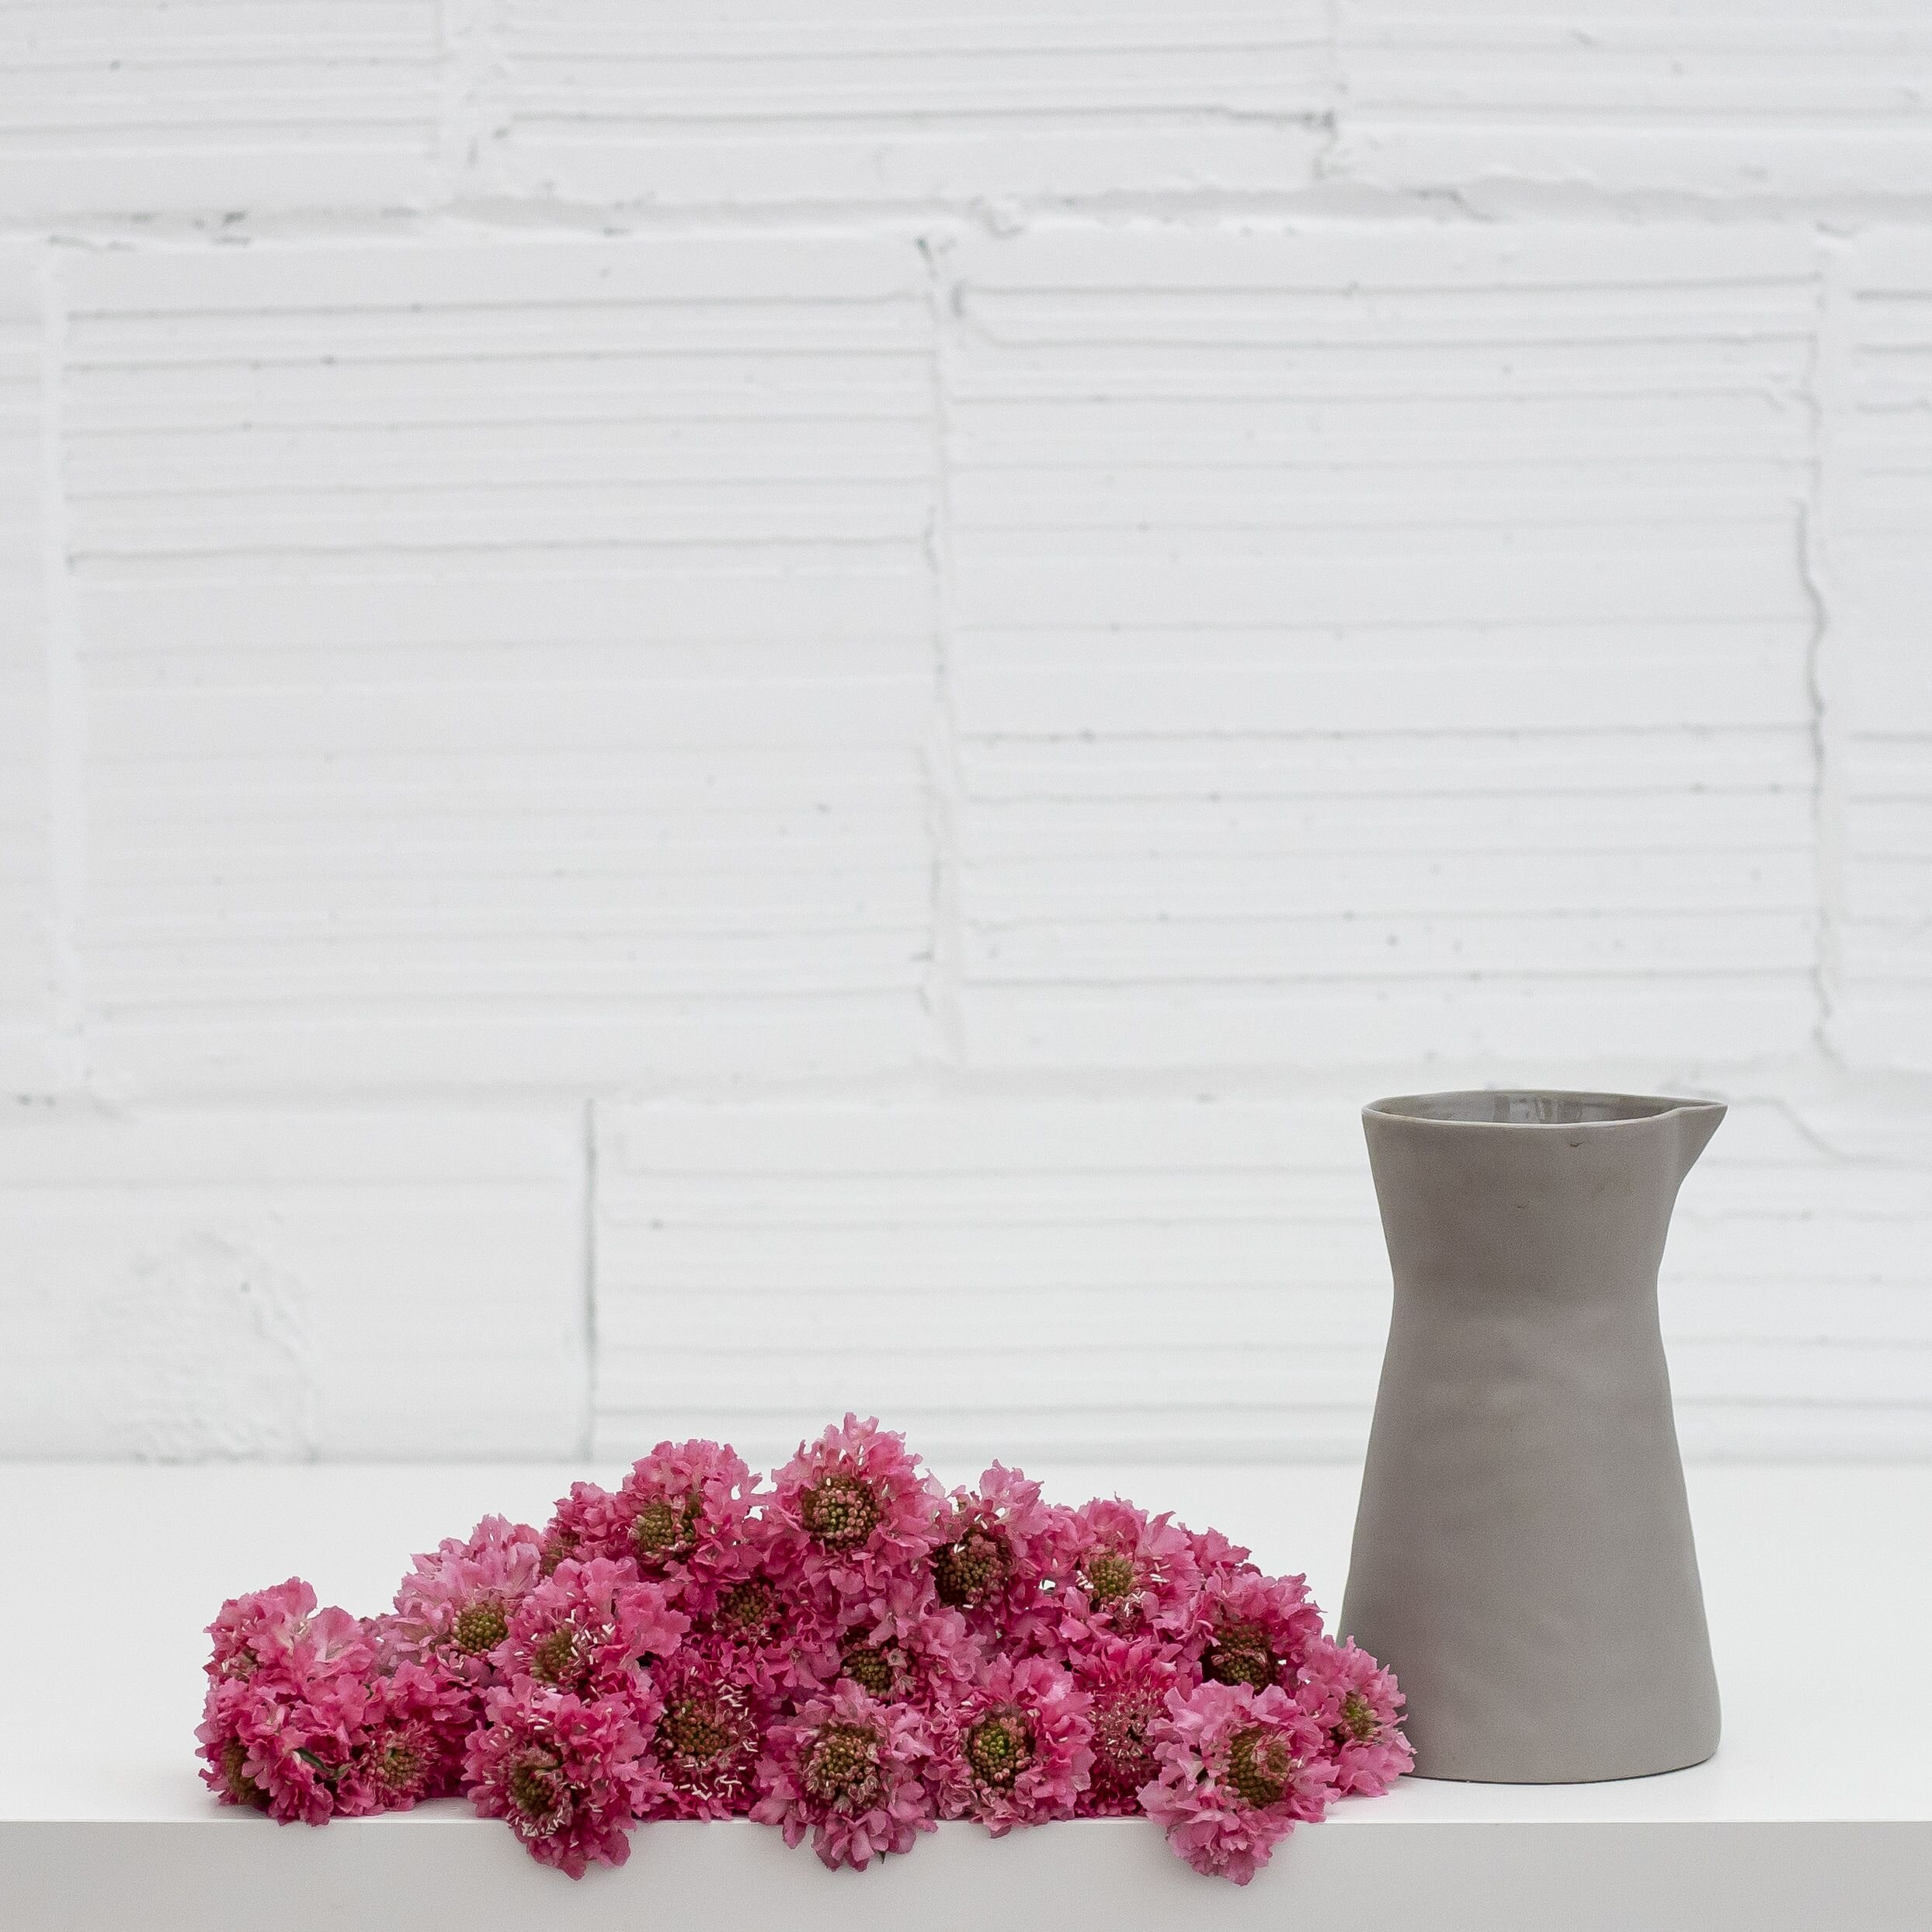 A bunch of pink scabiosa flowers laying flat with a stone vase placed beside them